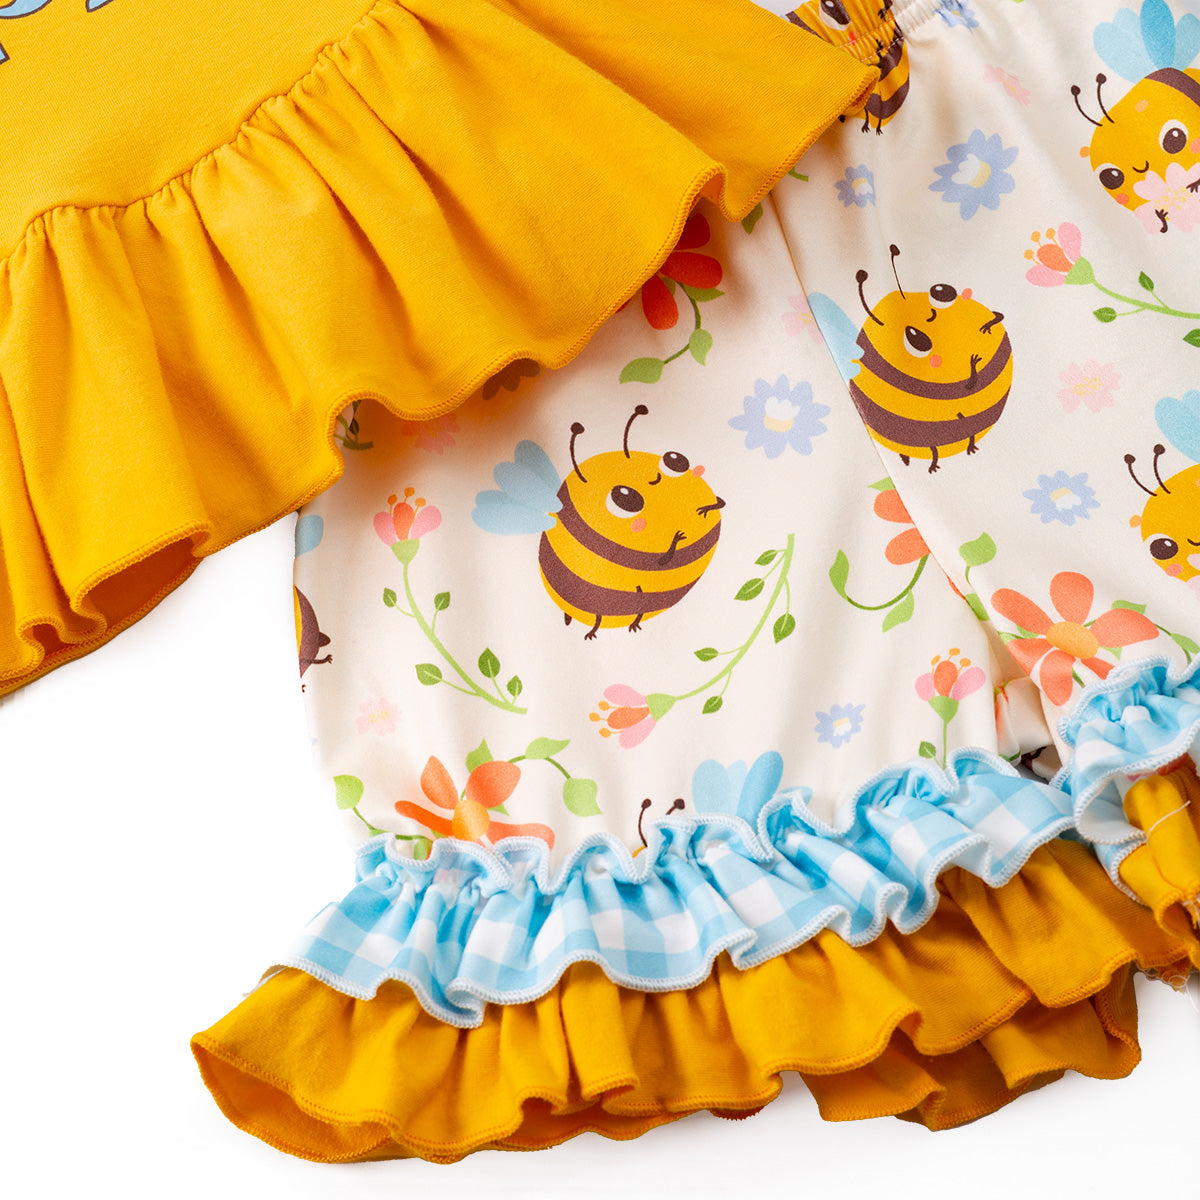 Bee Happy - Outfit